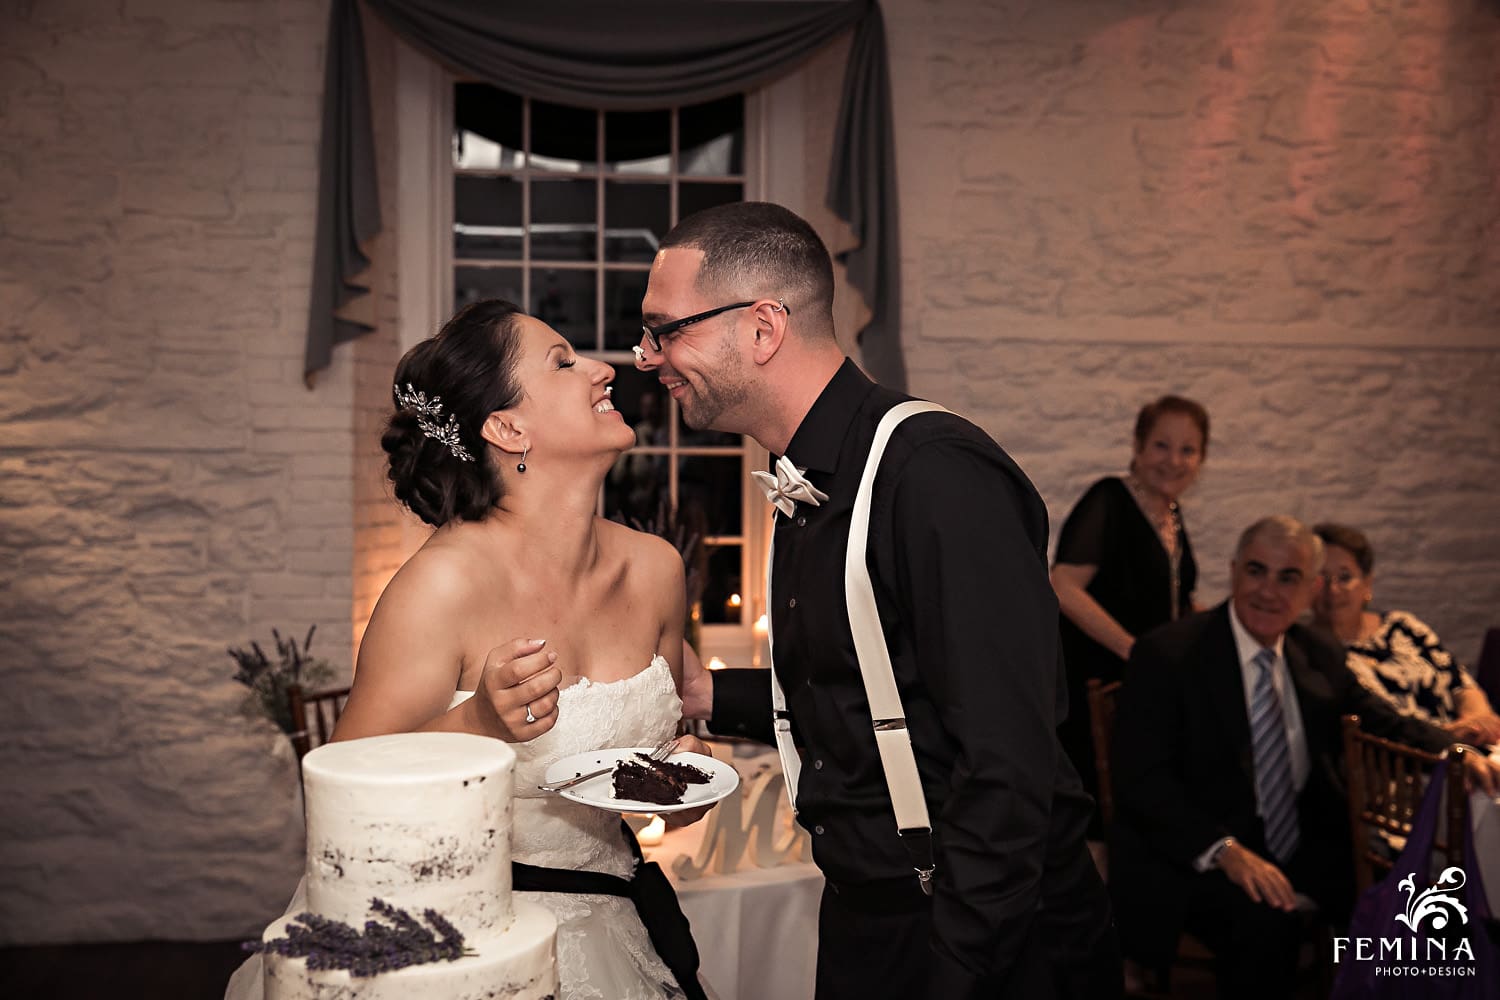 Marijela and Steven feed each other cake at their reception